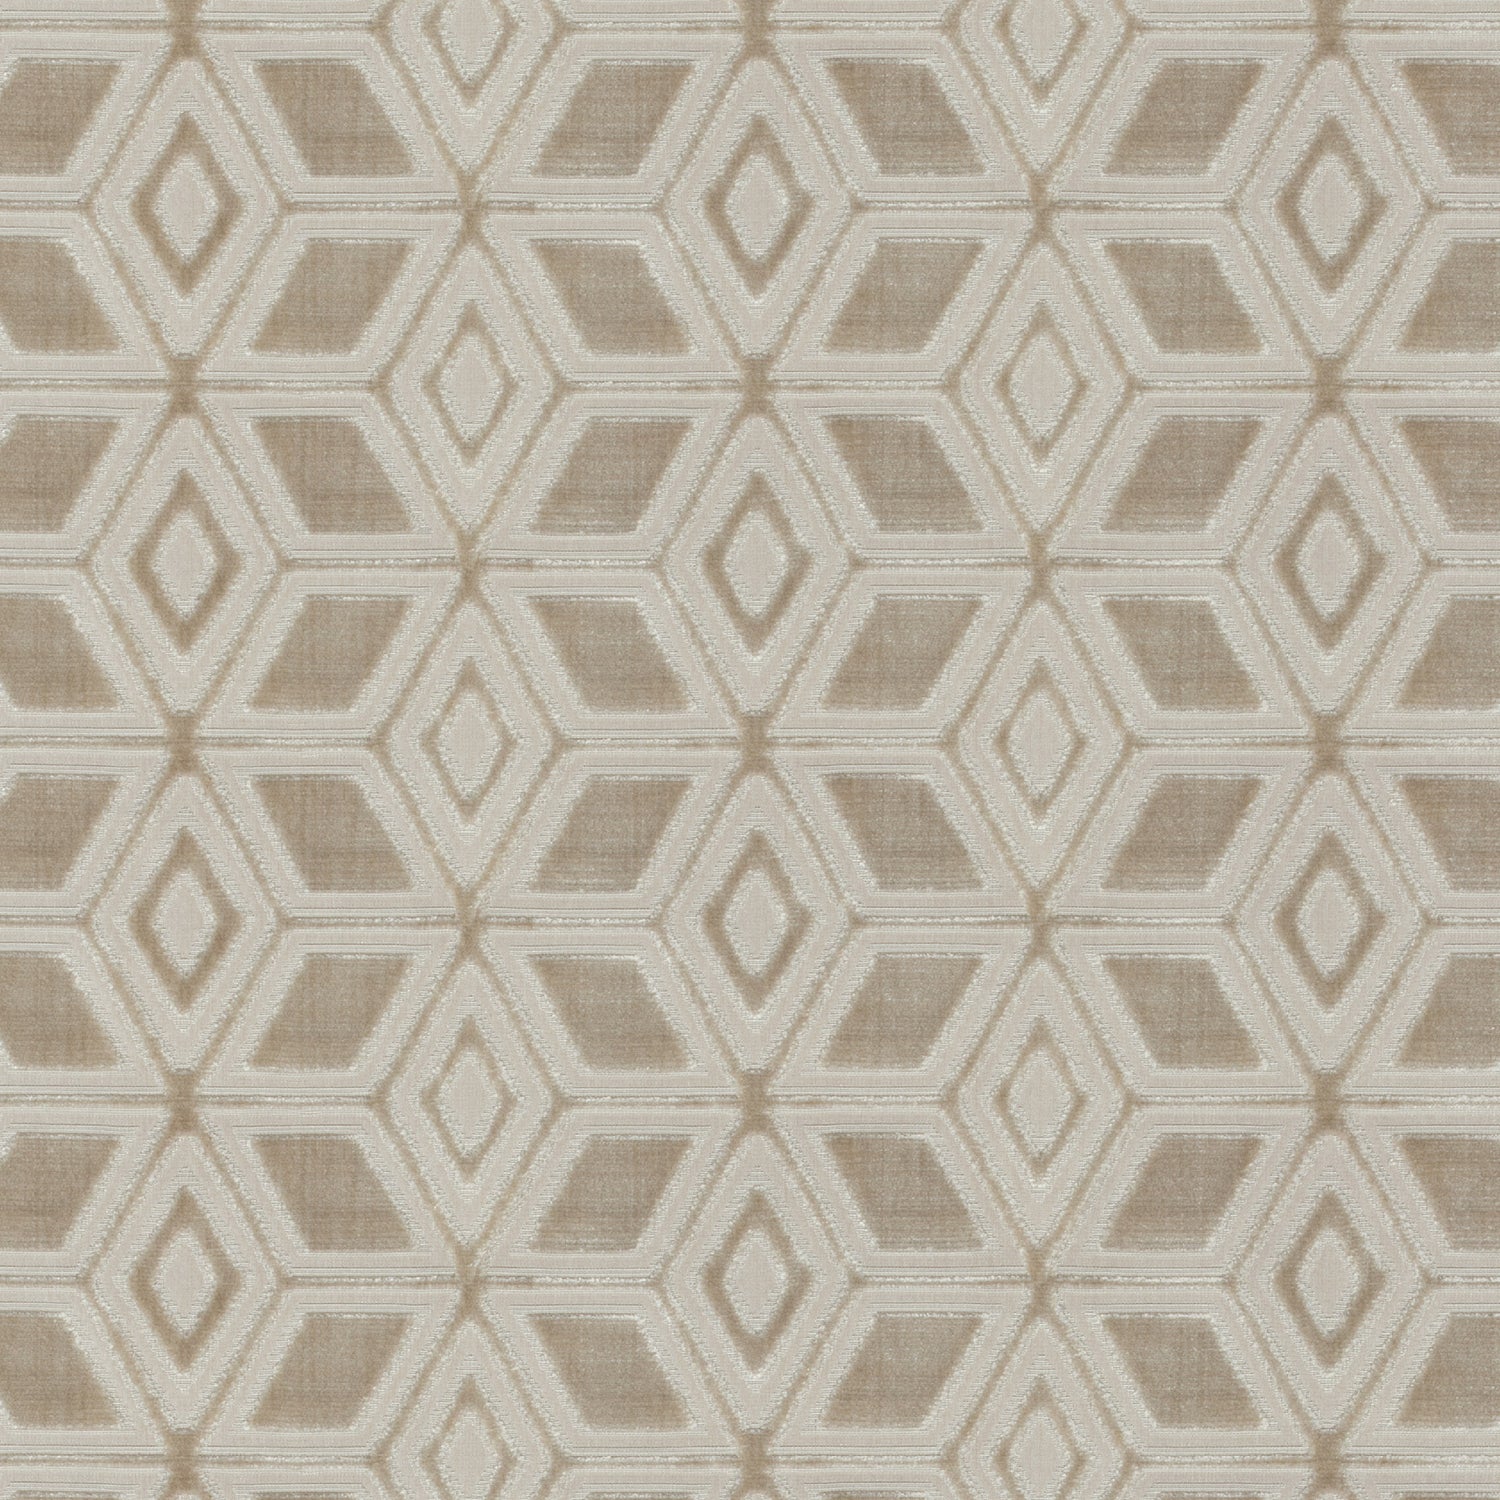 Jardin Maze fabric in cream color - pattern number AW72987 - by Anna French in the Manor collection